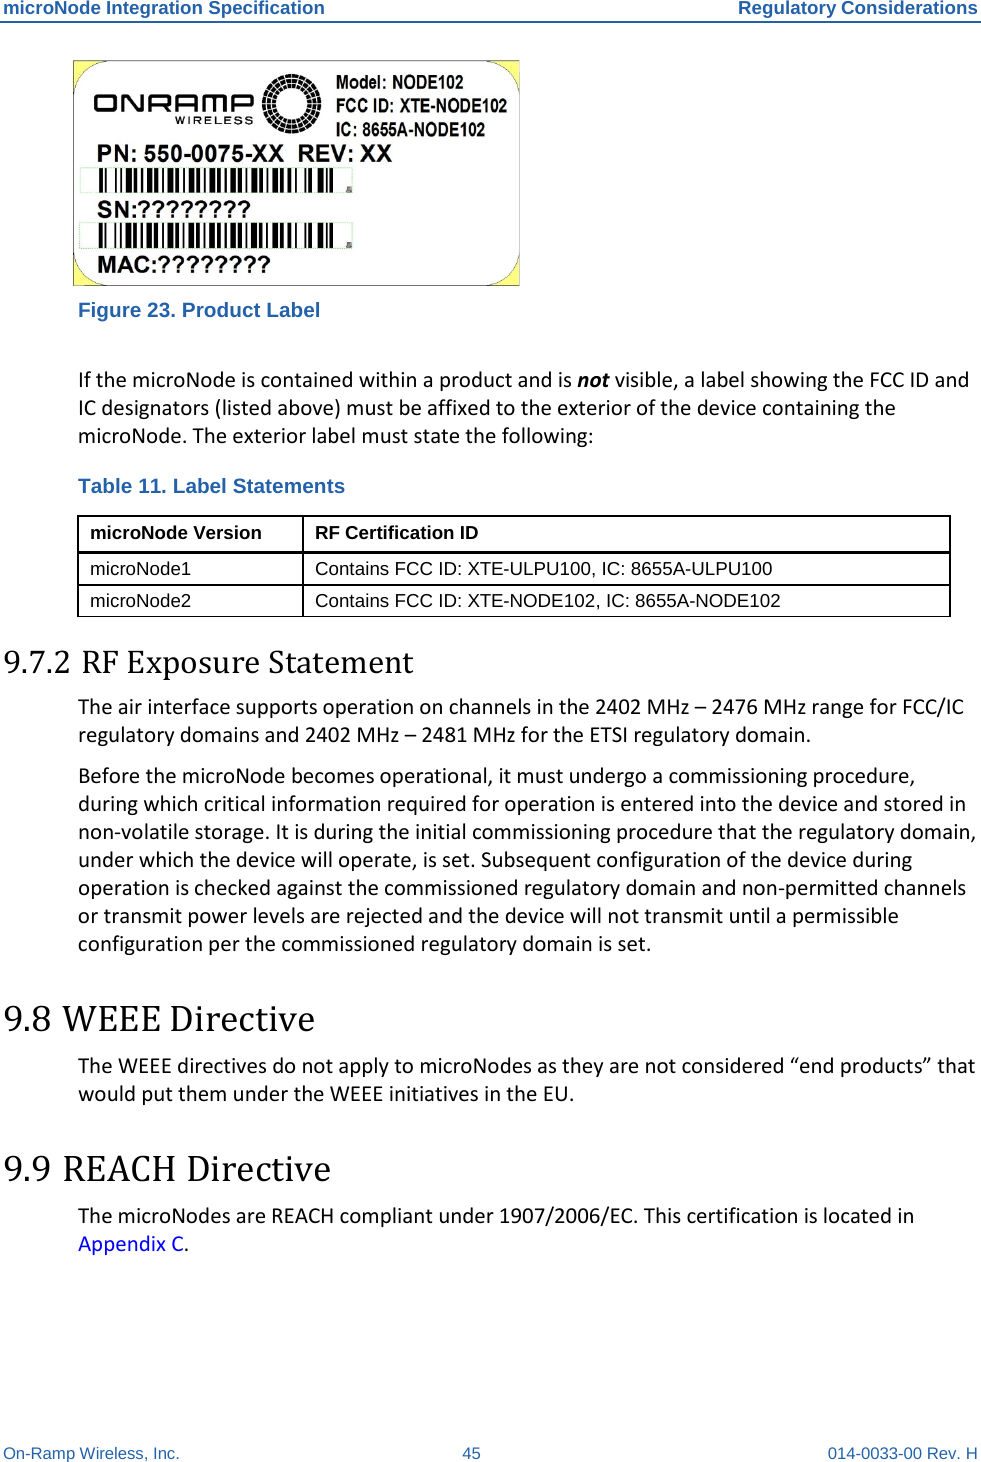 microNode Integration Specification Regulatory Considerations On-Ramp Wireless, Inc. 45 014-0033-00 Rev. H  Figure 23. Product Label  If the microNode is contained within a product and is not visible, a label showing the FCC ID and IC designators (listed above) must be affixed to the exterior of the device containing the microNode. The exterior label must state the following:  Table 11. Label Statements microNode Version RF Certification ID microNode1 Contains FCC ID: XTE-ULPU100, IC: 8655A-ULPU100 microNode2 Contains FCC ID: XTE-NODE102, IC: 8655A-NODE102 9.7.2 RF Exposure Statement  The air interface supports operation on channels in the 2402 MHz – 2476 MHz range for FCC/IC regulatory domains and 2402 MHz – 2481 MHz for the ETSI regulatory domain.  Before the microNode becomes operational, it must undergo a commissioning procedure, during which critical information required for operation is entered into the device and stored in non-volatile storage. It is during the initial commissioning procedure that the regulatory domain, under which the device will operate, is set. Subsequent configuration of the device during operation is checked against the commissioned regulatory domain and non-permitted channels or transmit power levels are rejected and the device will not transmit until a permissible configuration per the commissioned regulatory domain is set. 9.8 WEEE Directive The WEEE directives do not apply to microNodes as they are not considered “end products” that would put them under the WEEE initiatives in the EU.  9.9 REACH Directive The microNodes are REACH compliant under 1907/2006/EC. This certification is located in Appendix C. 